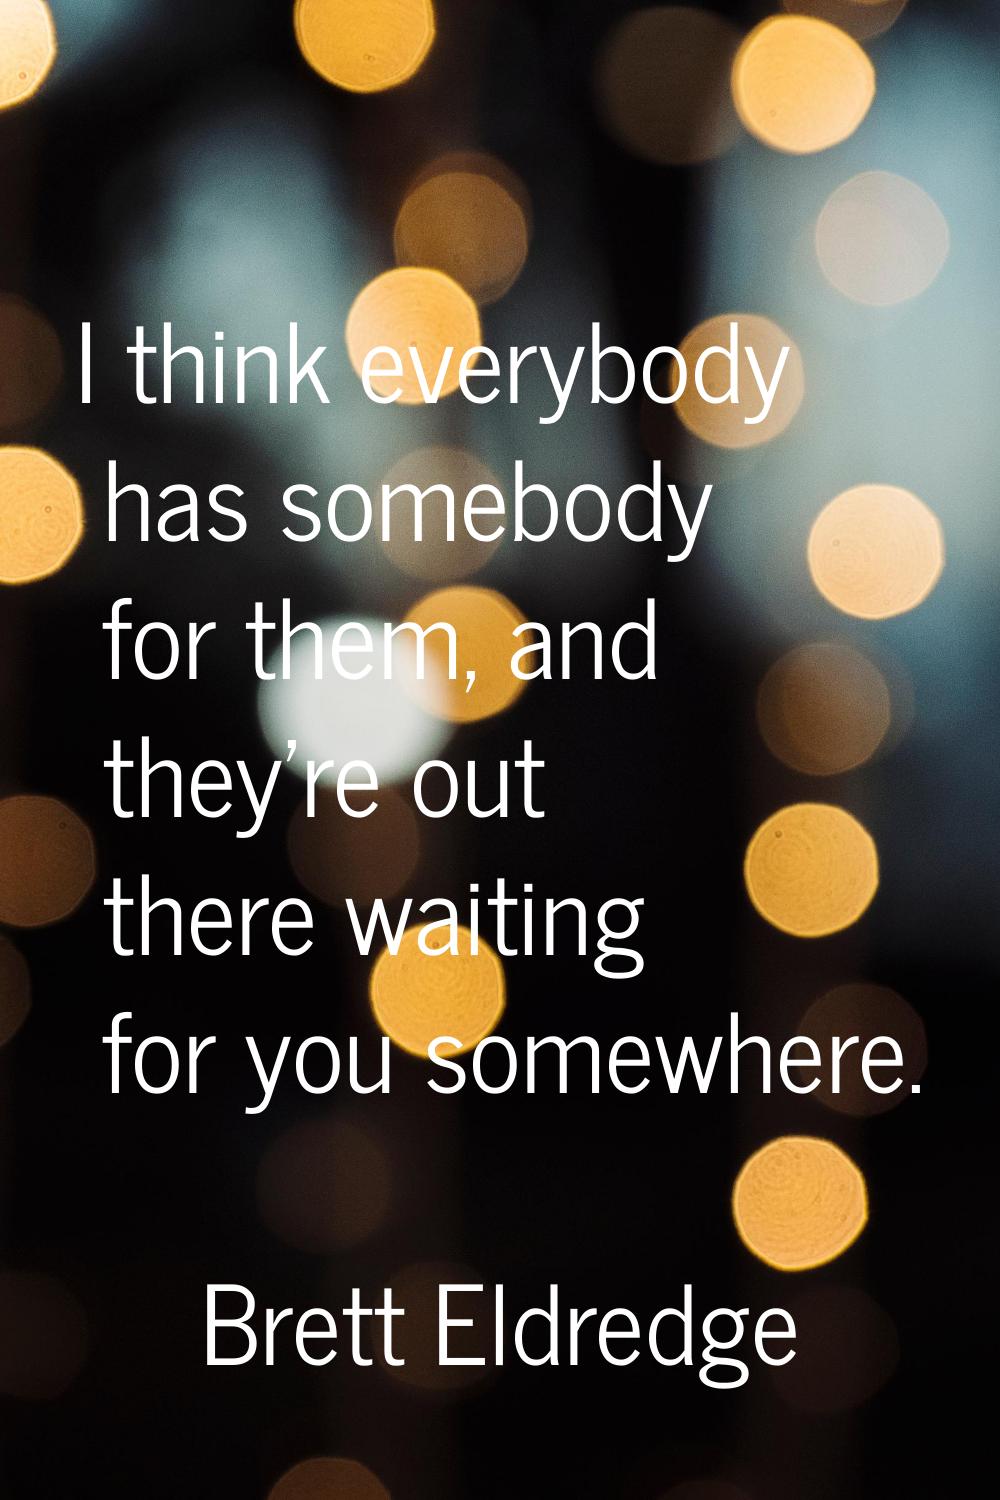 I think everybody has somebody for them, and they're out there waiting for you somewhere.